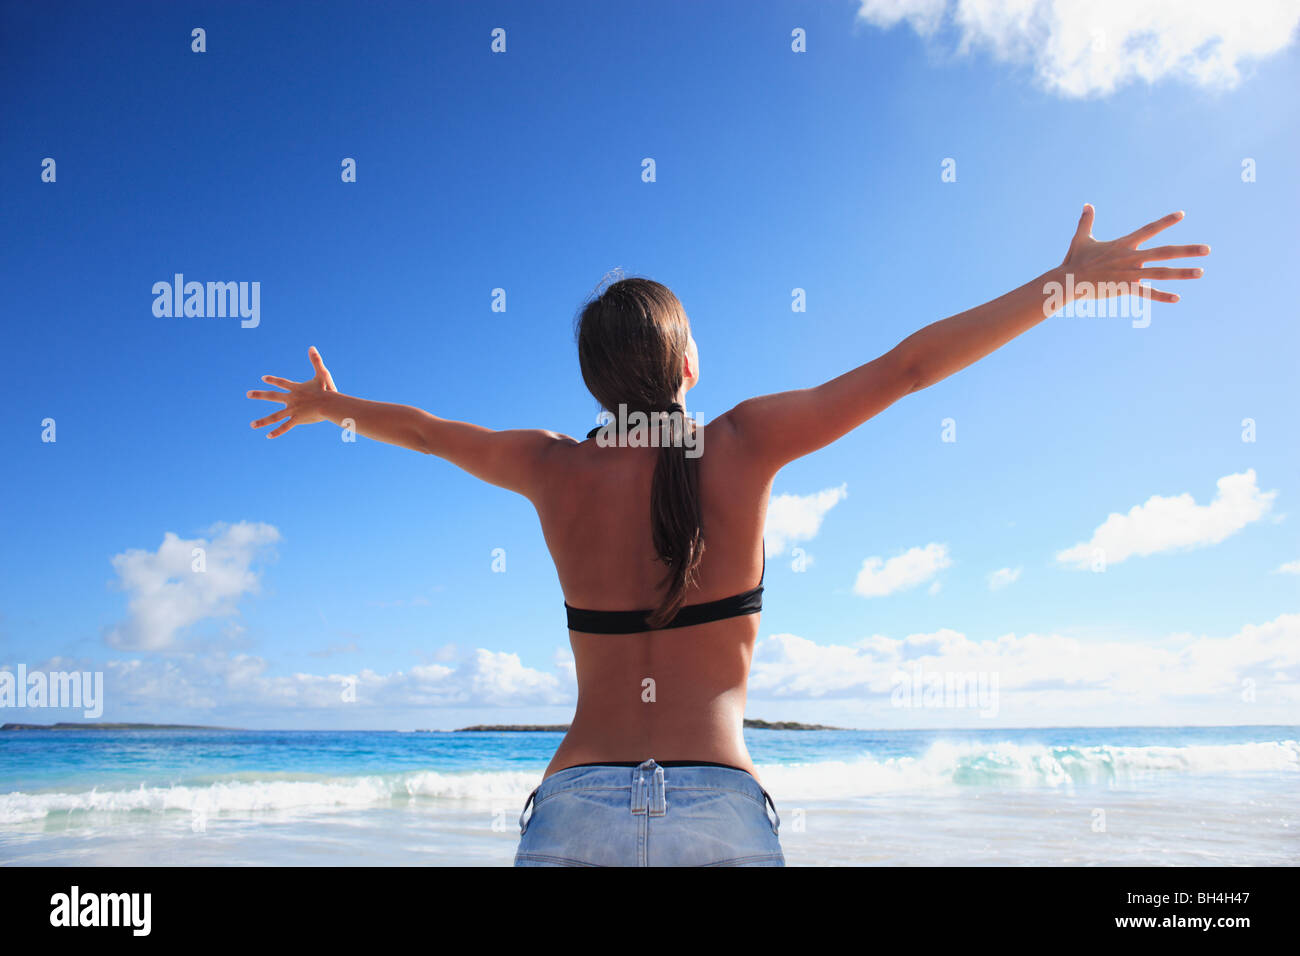 Young woman with her arms raised in celebration towards the sky on a deserted tropical beach Stock Photo